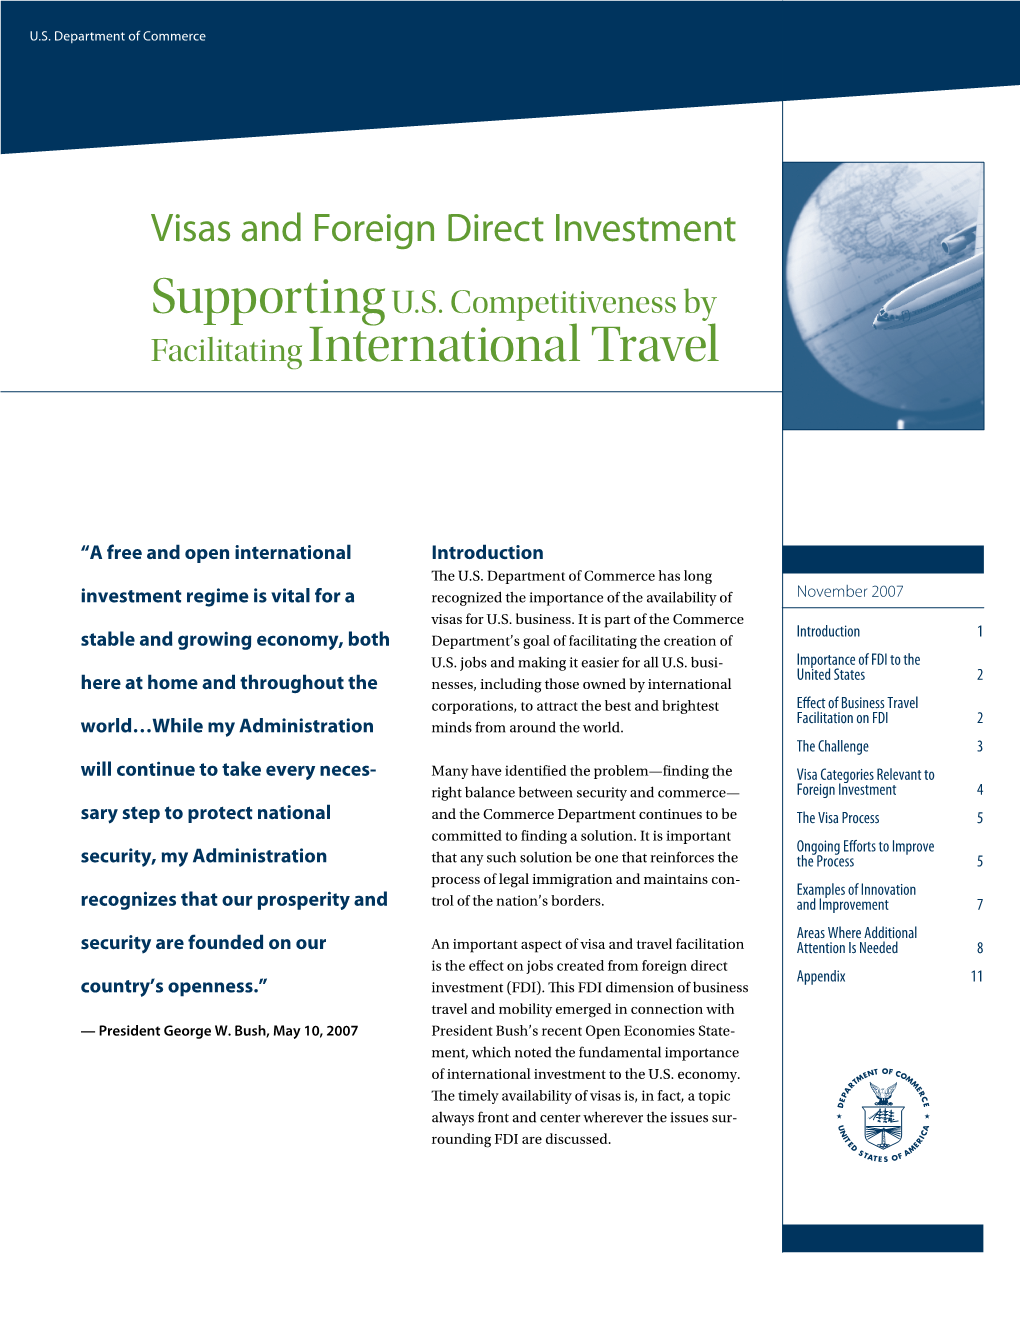 Visas and Foreign Direct Investment Supporting U.S